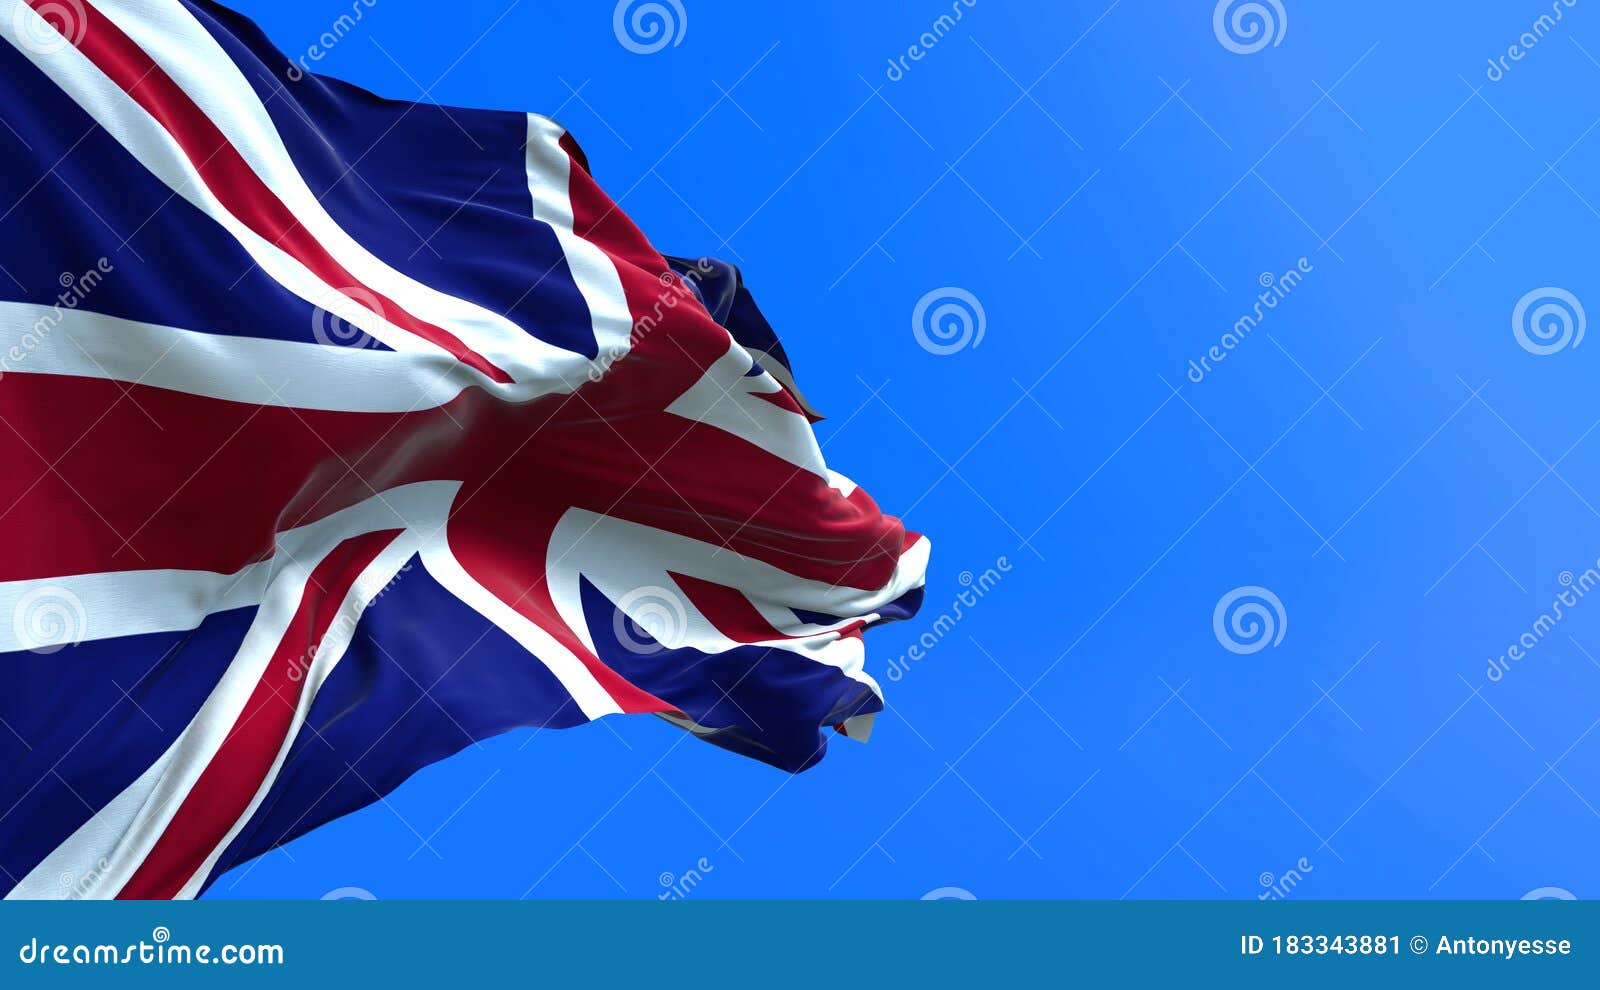 3d realistic waving flag background